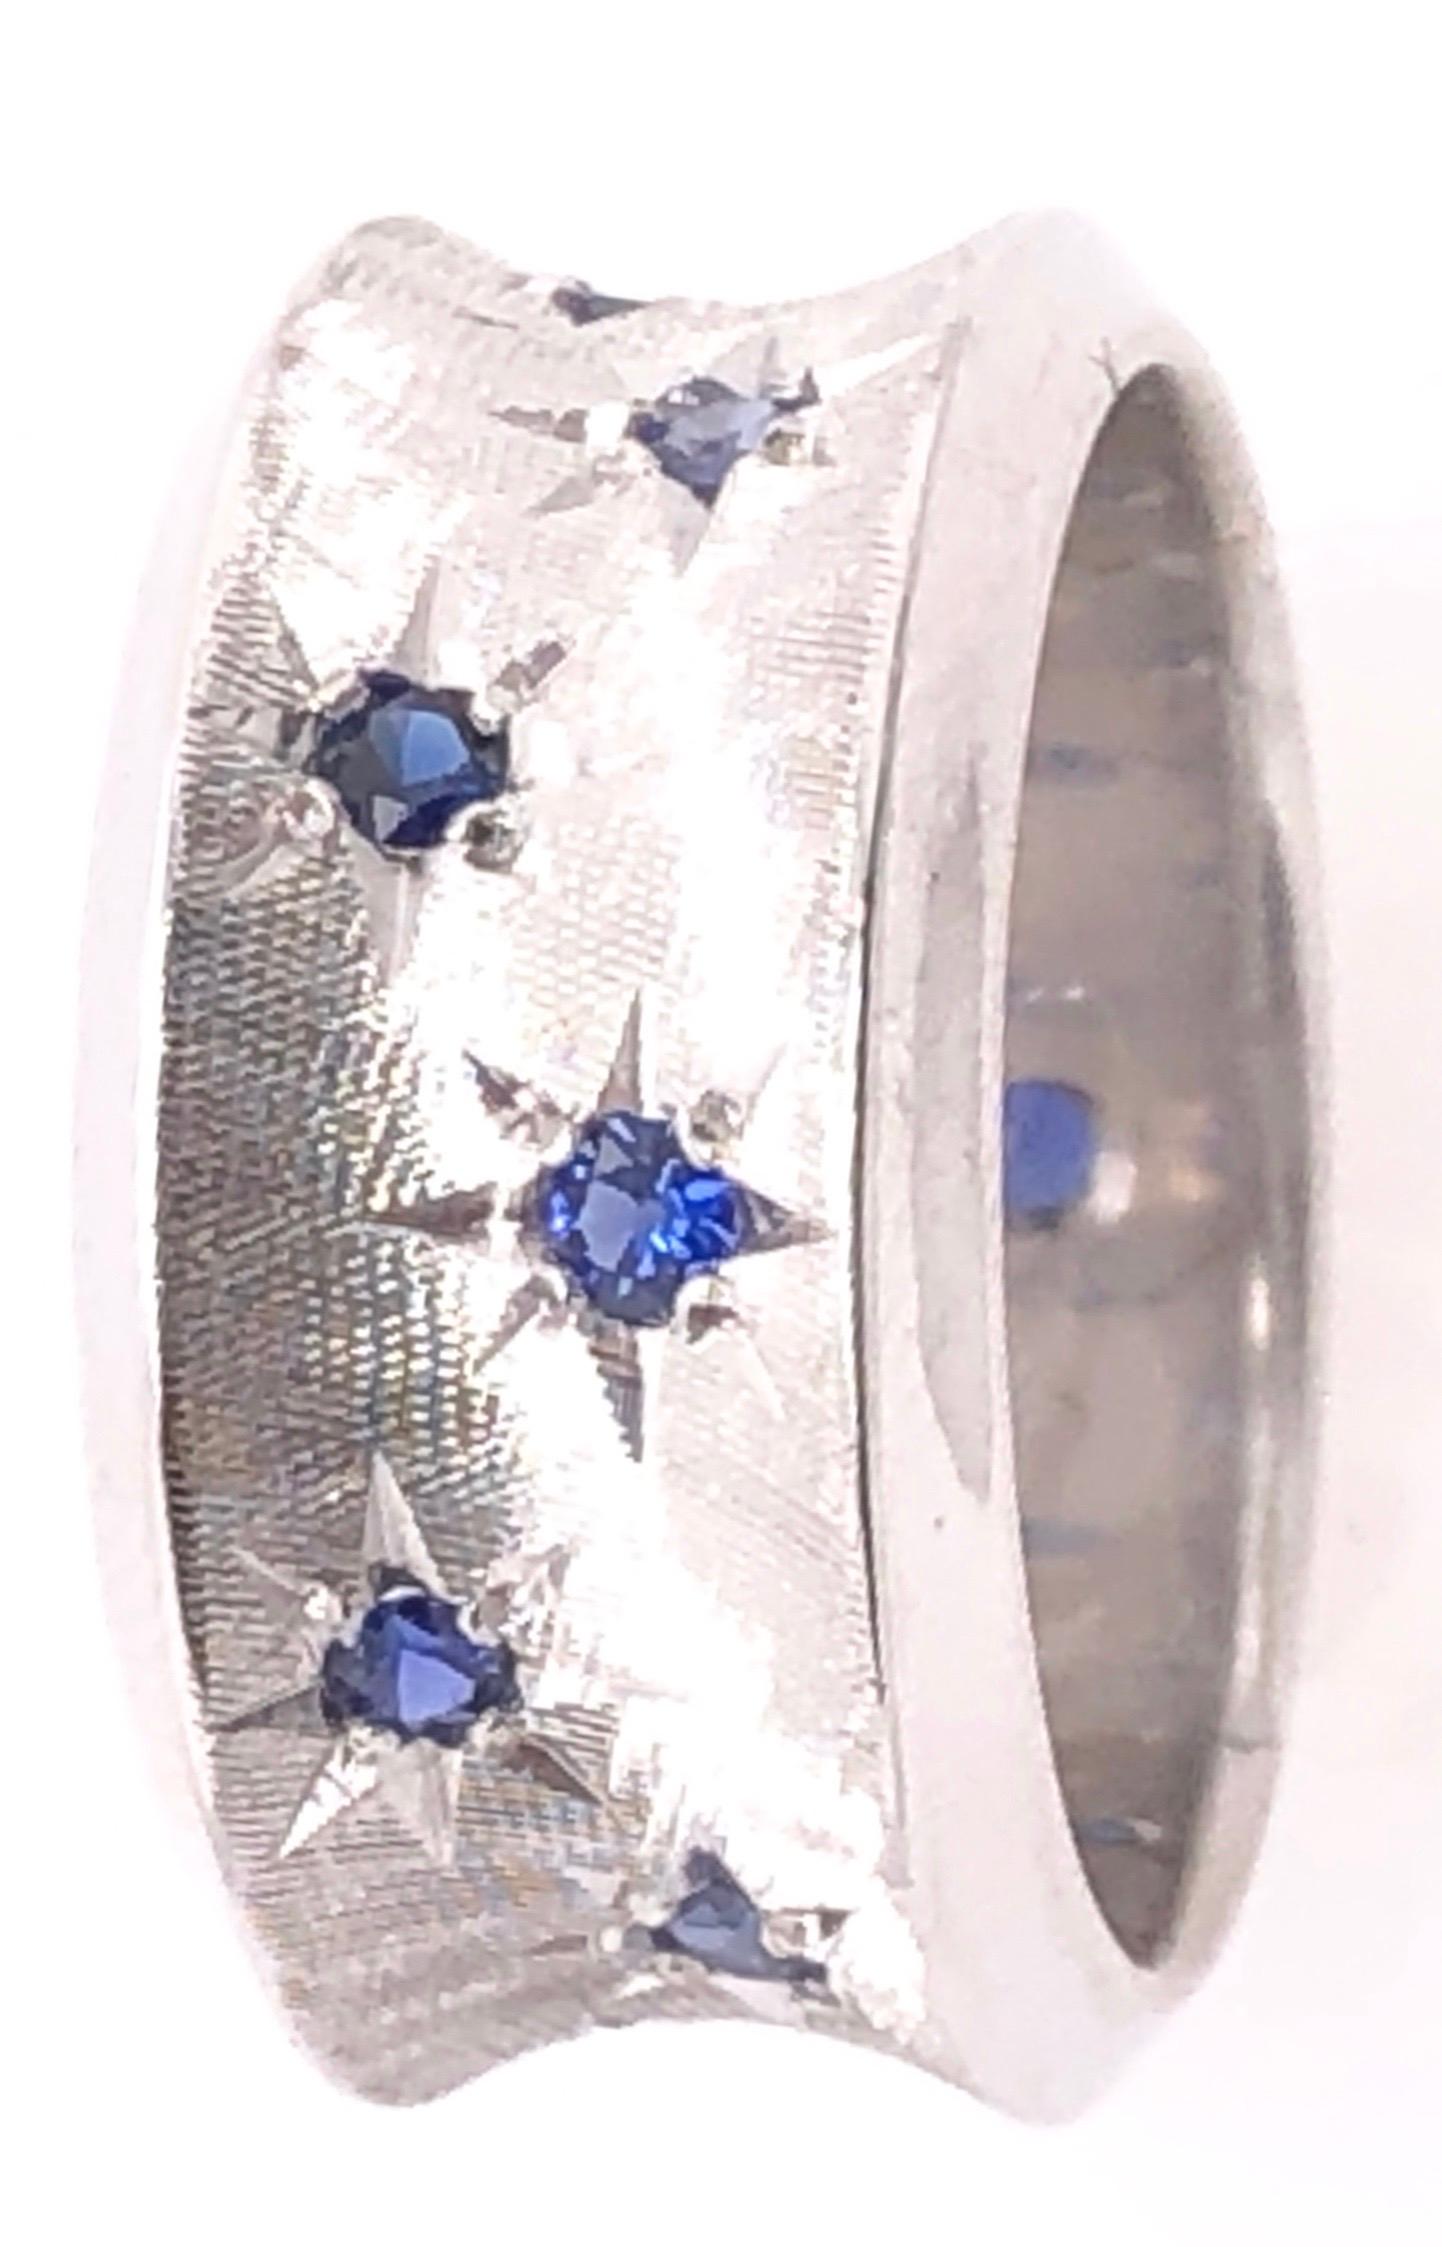 14 Karat White Gold Fashion Ring with Round Sapphires.
Size 6
9.05 grams total weight.